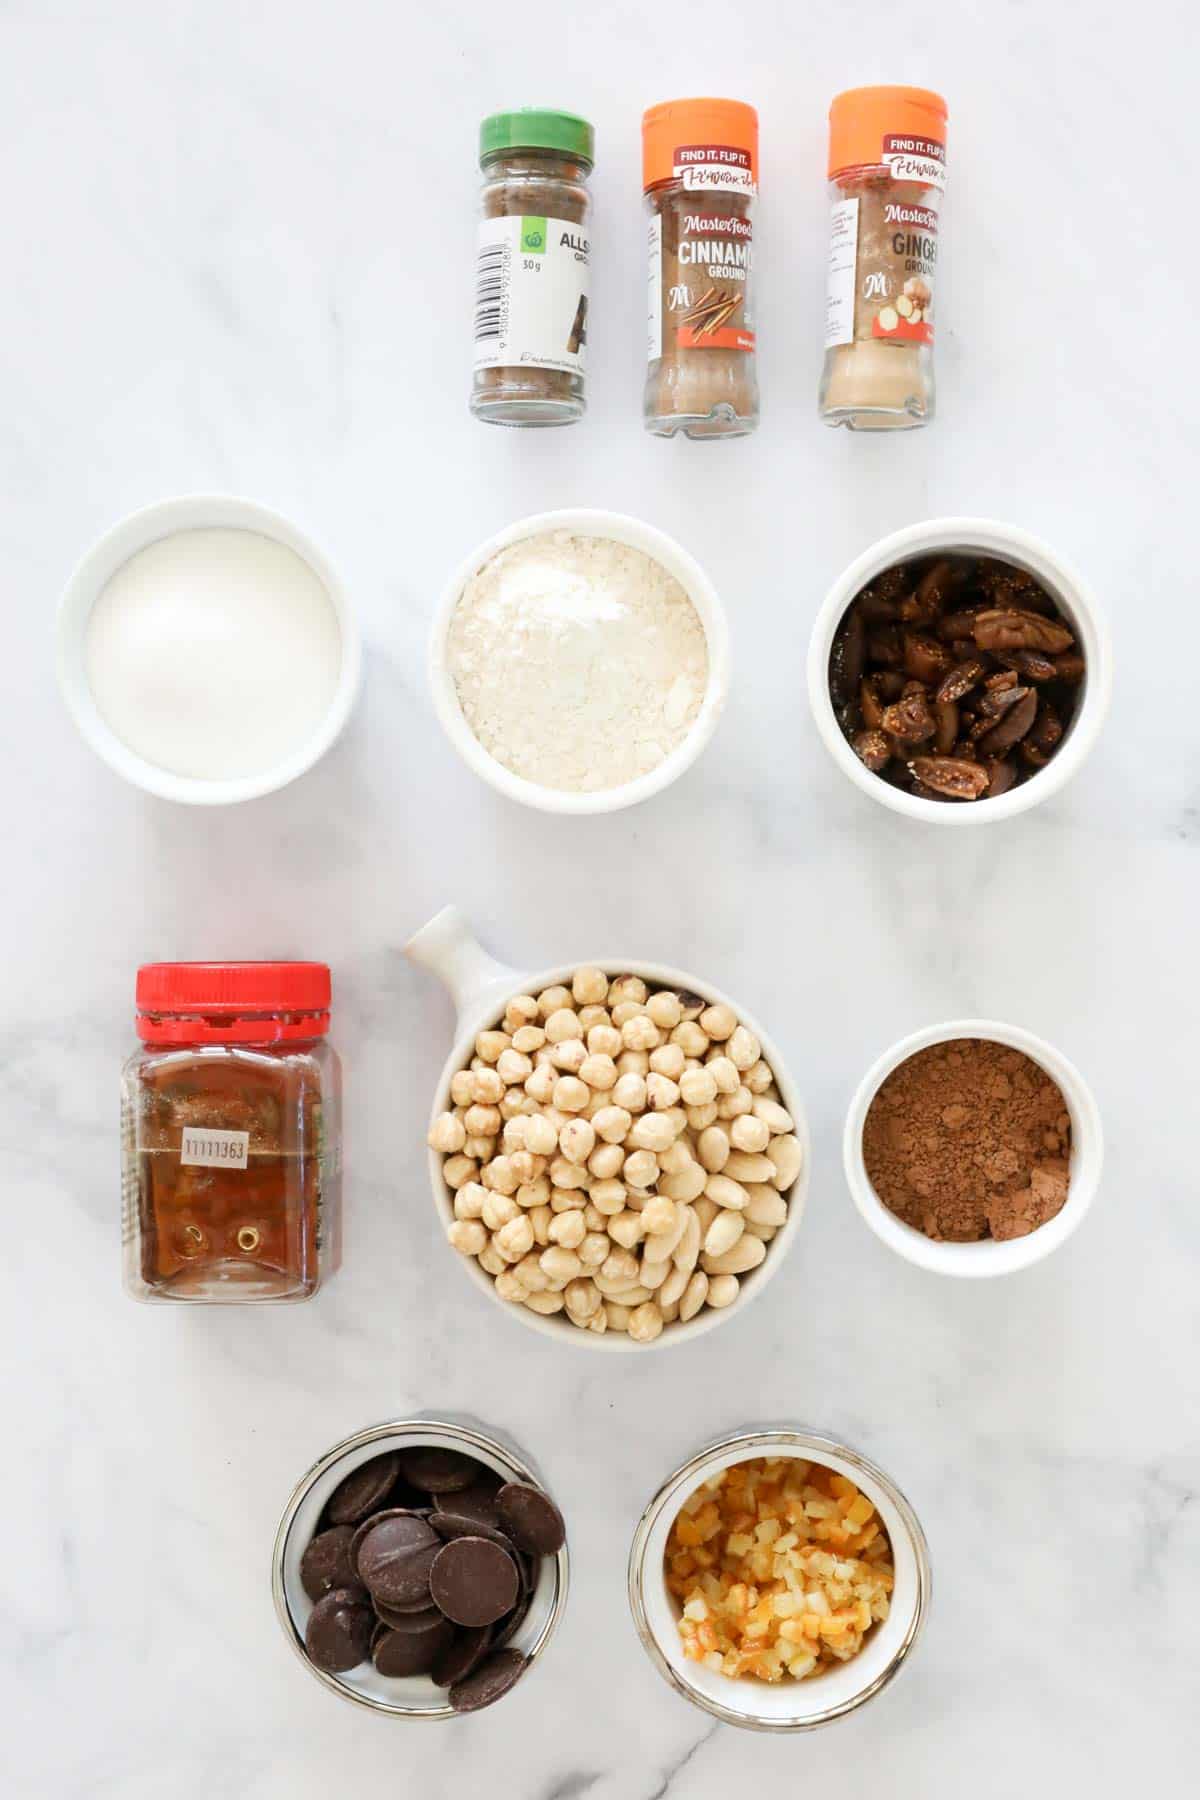 The ingredients for panforte.